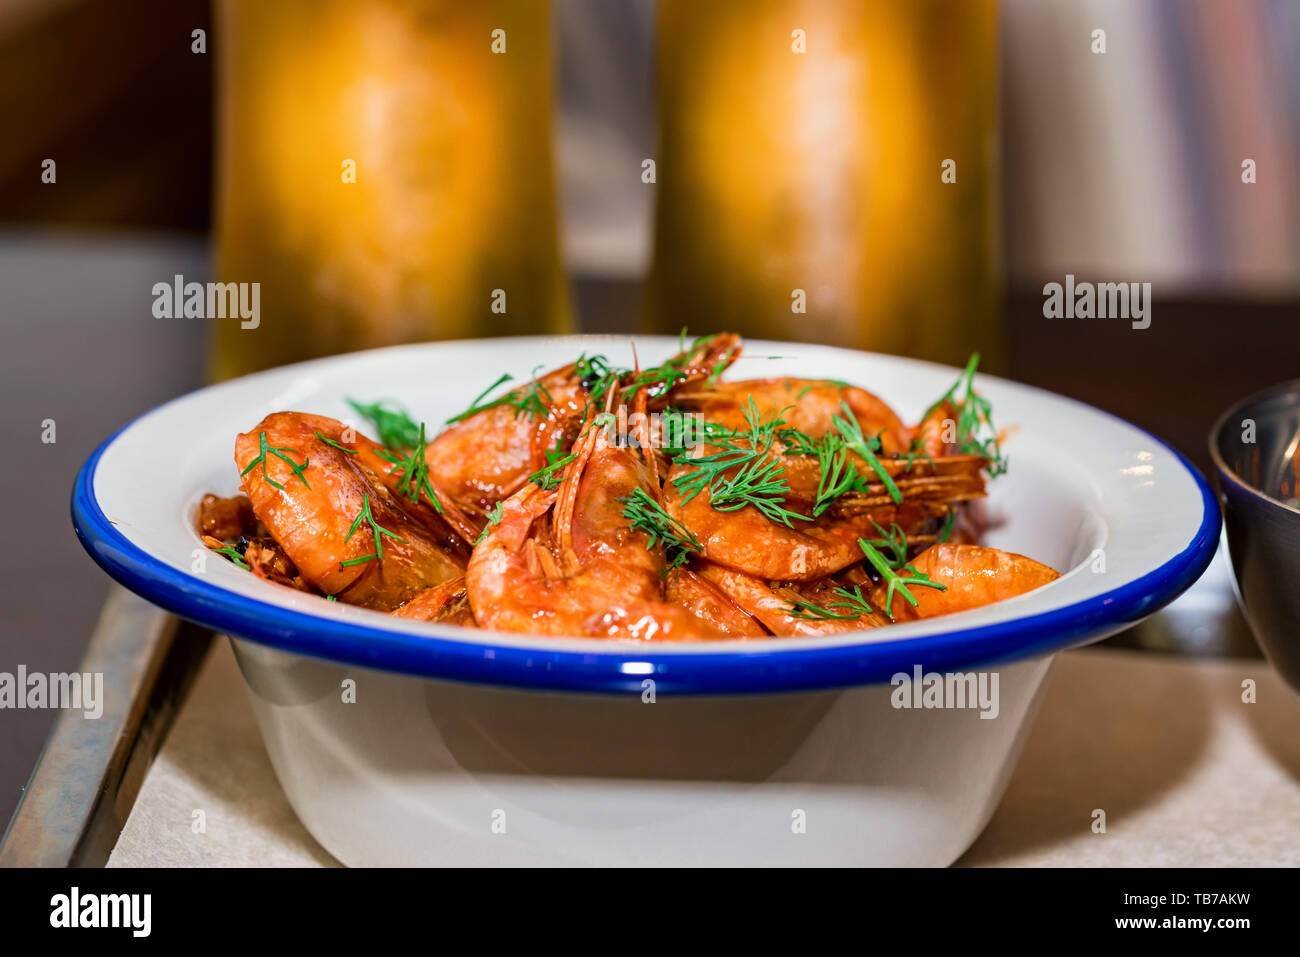 Prepared shrimps with dill in bowl on table with two beer glasses Stock Photo